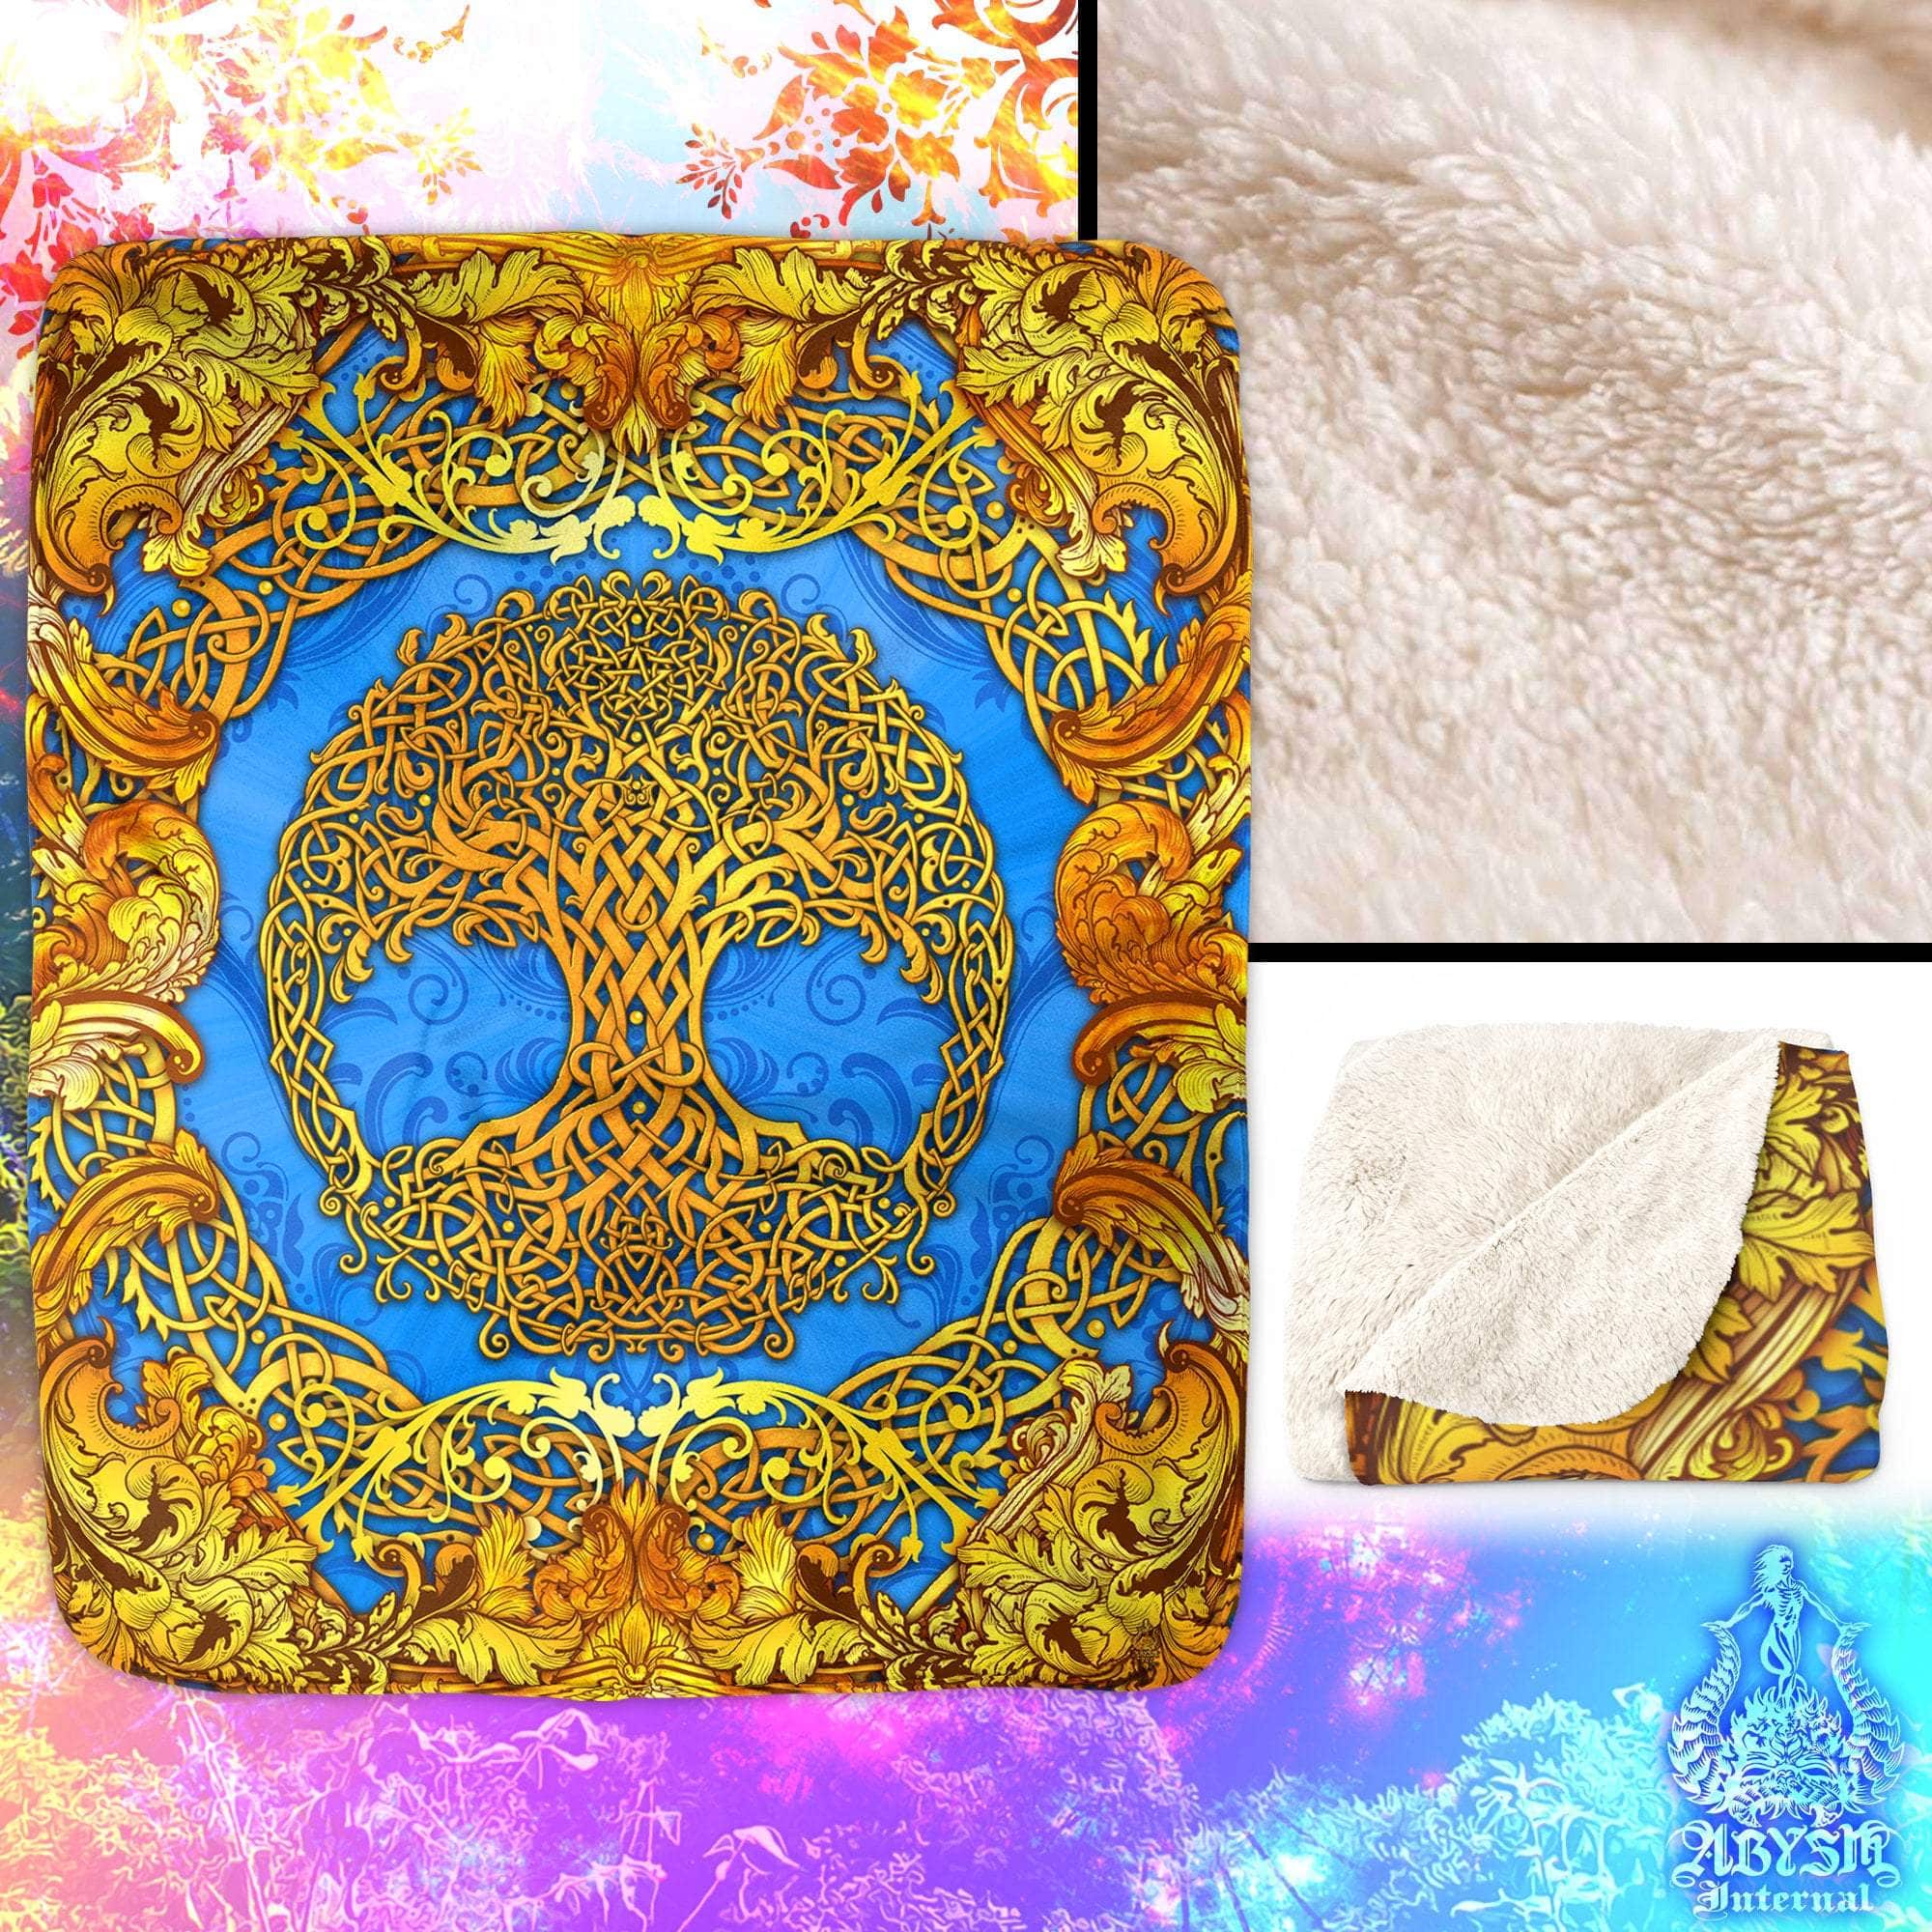 Tree of Life Throw Fleece Blanket, Pagan Decor, Celtic Knot, Witchy Room, Wiccan, Eclectic and Funky Gift - Cyan & Gold - Abysm Internal